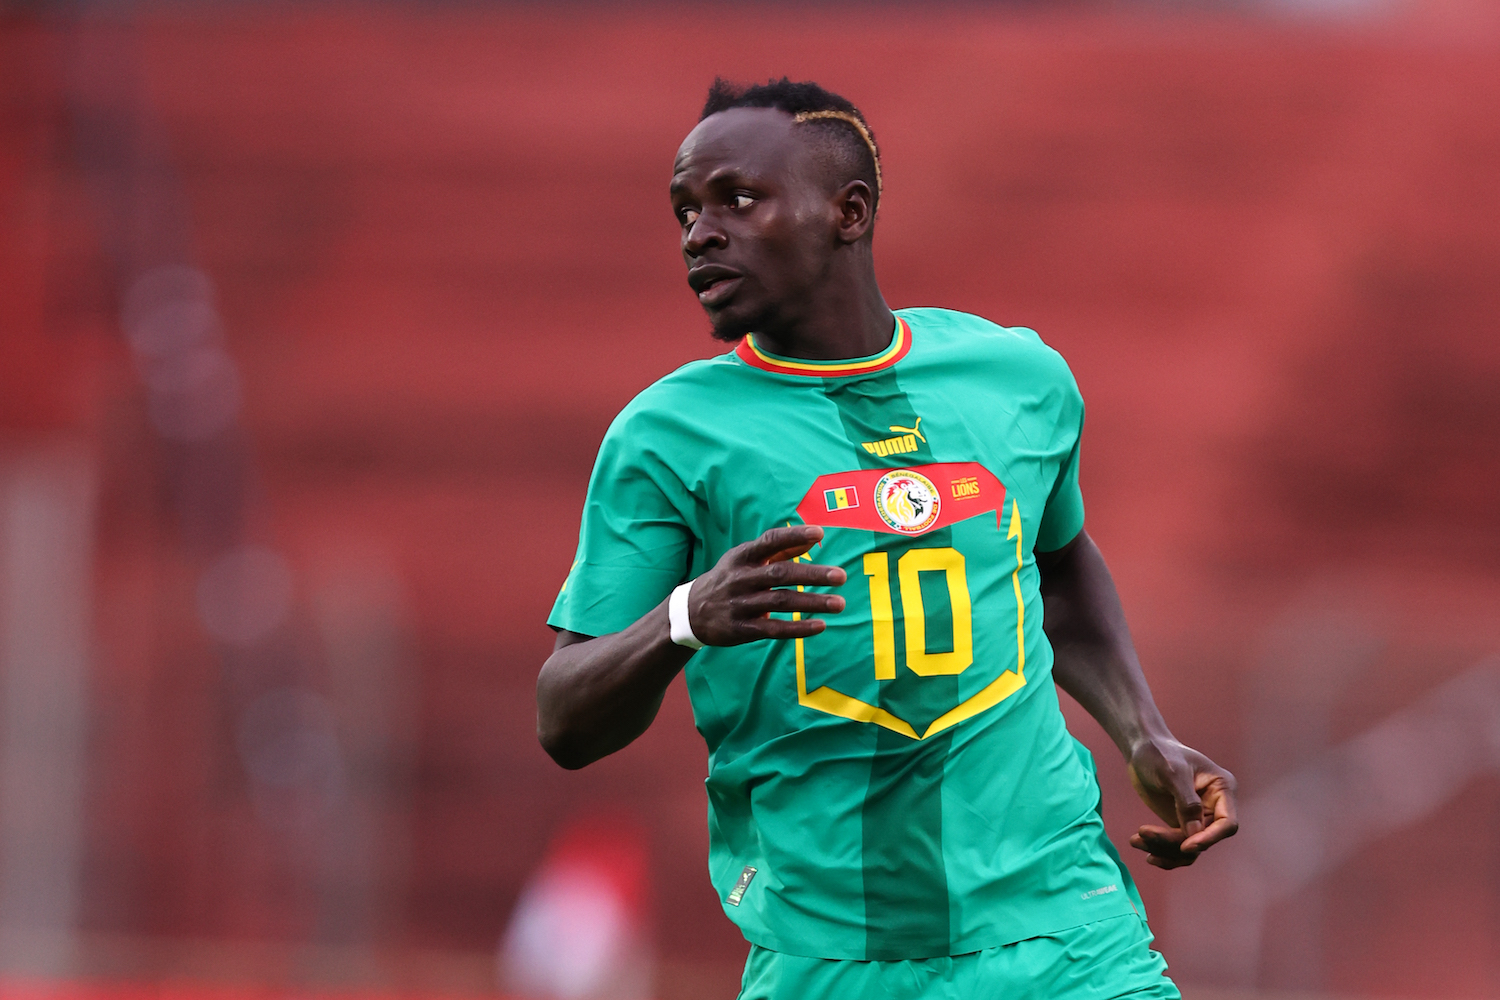 a senegalese soccer player in a green jersey